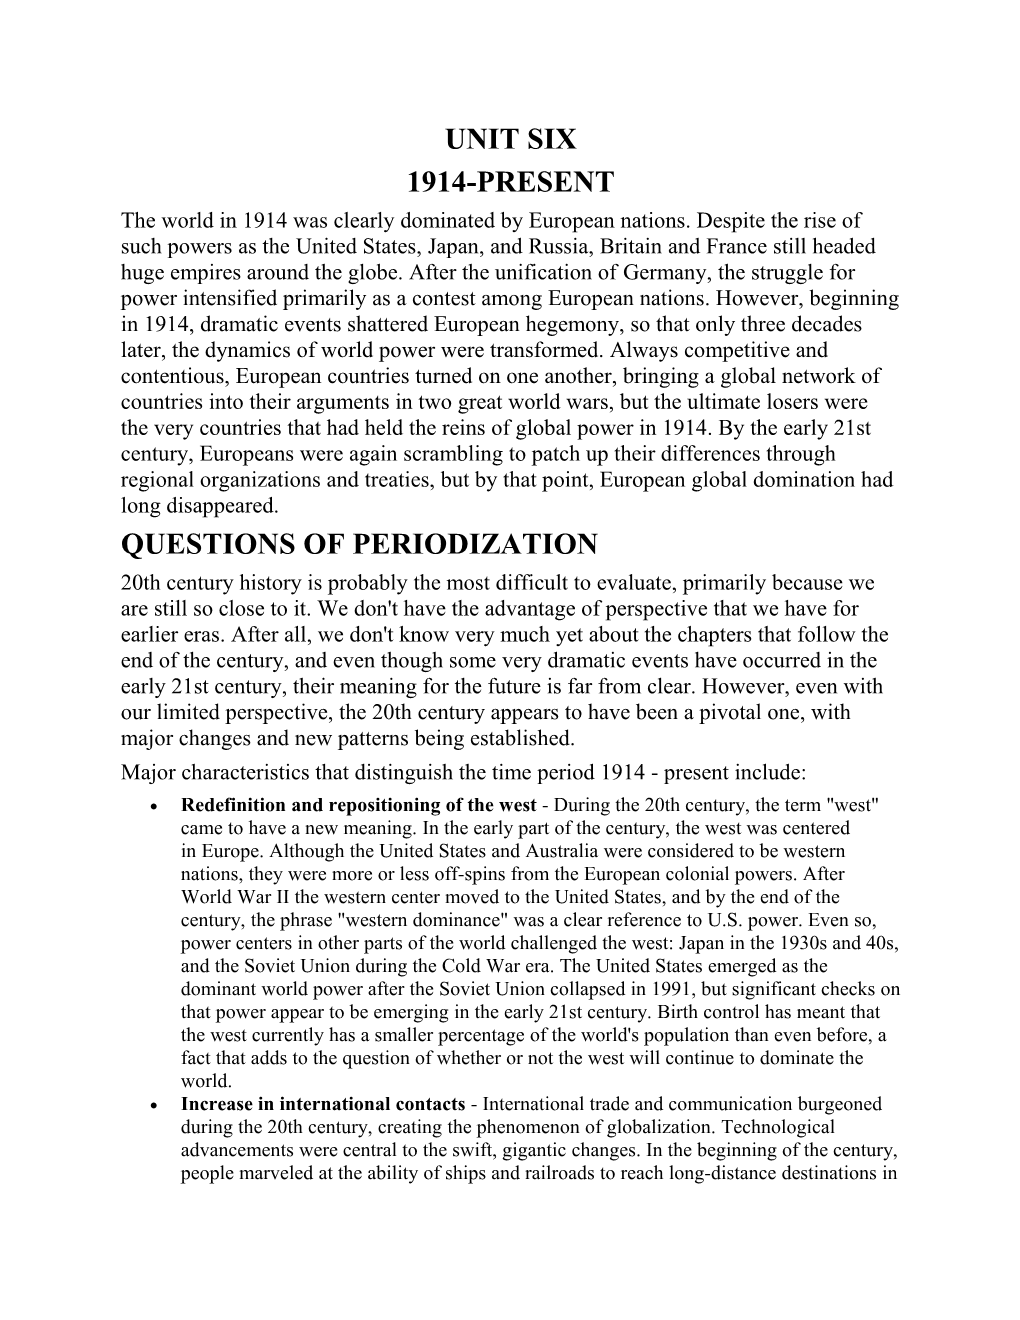 Questions of Periodization